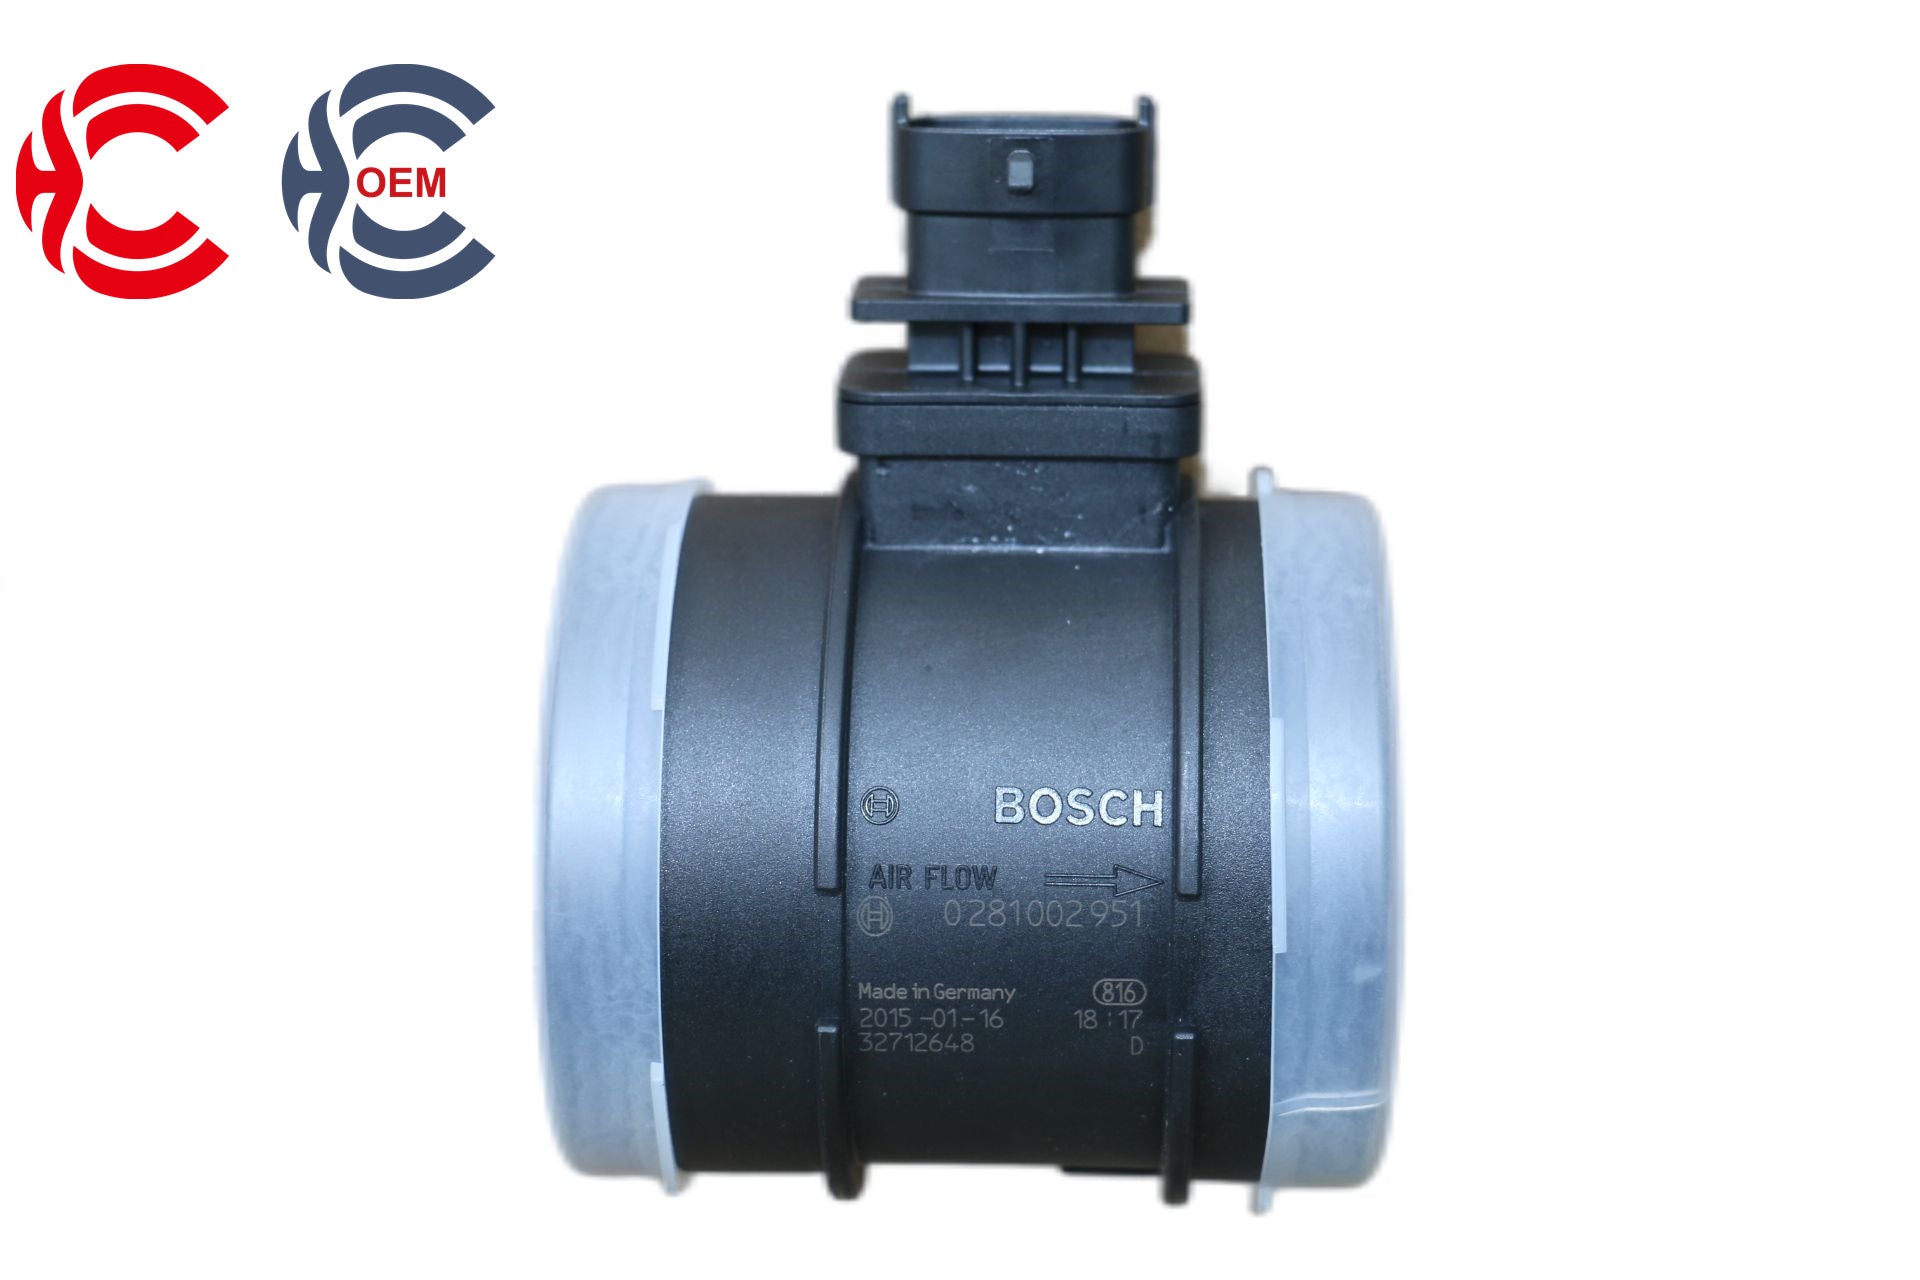 OEM: 0281002951Material: ABSColor: BlackOrigin: Made in ChinaWeight: 200gPacking List: 1* Air Flow Sensor Sensor More ServiceWe can provide OEM Manufacturing serviceWe can Be your one-step solution for Auto PartsWe can provide technical scheme for you Feel Free to Contact Us, We will get back to you as soon as possible.